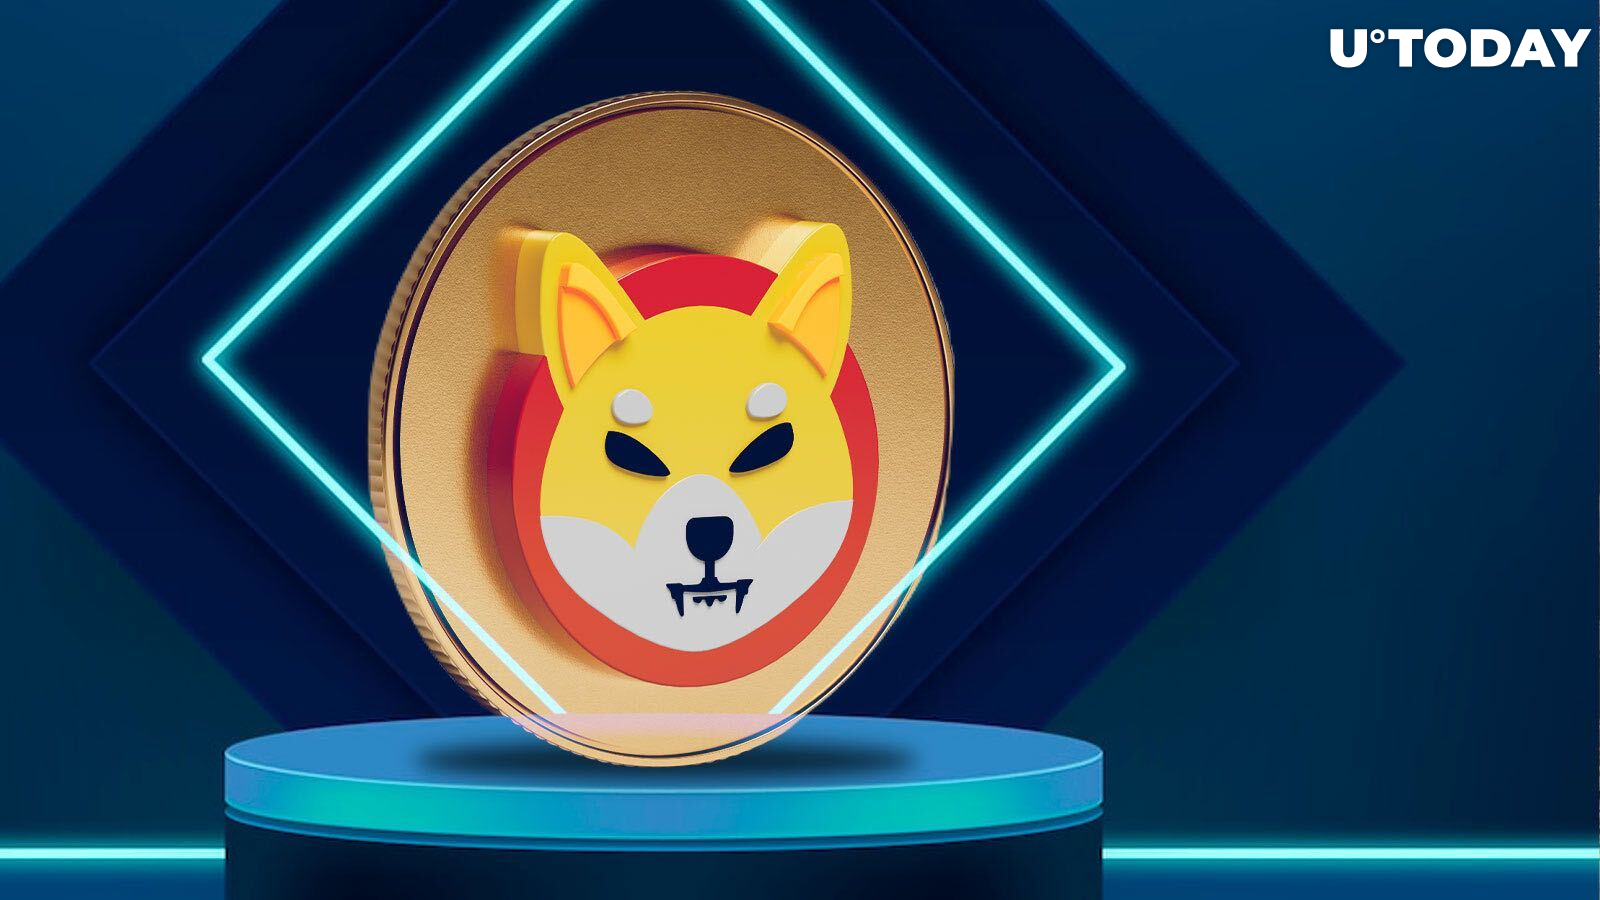 SHIB Achieves Top 3 Spot Among Most Profitable Assets of Week, DOGE Takes 5th Place